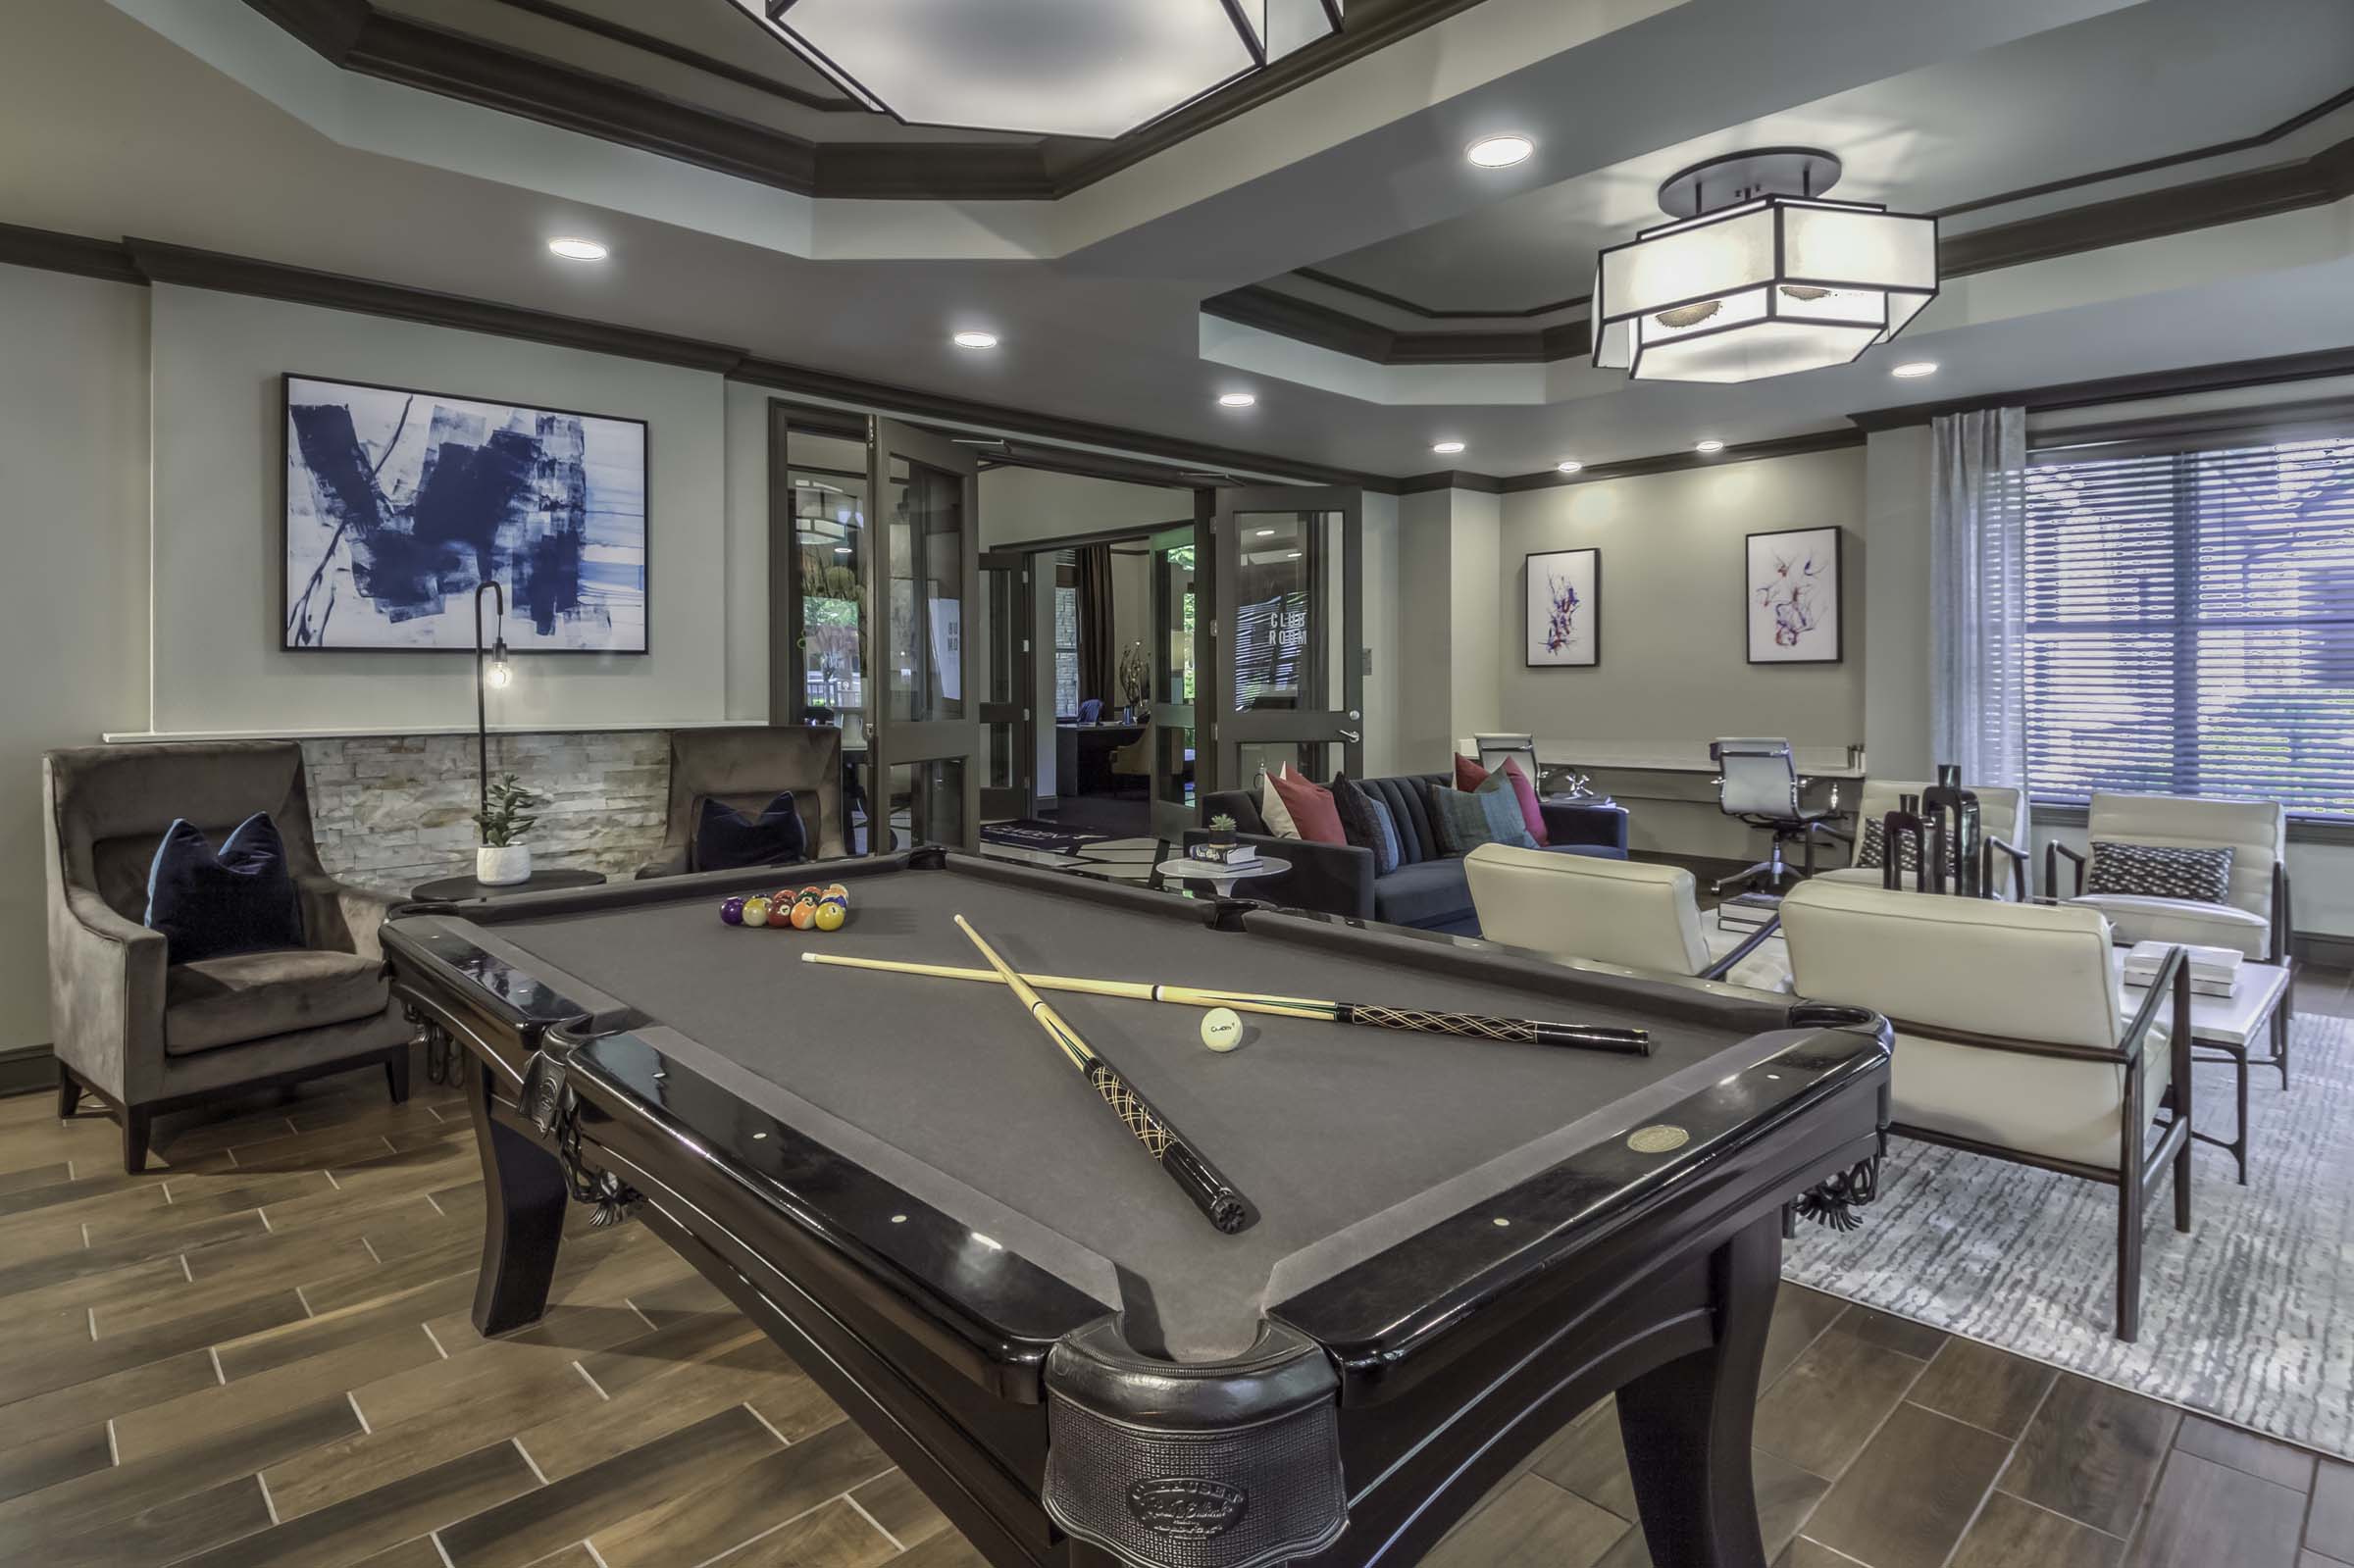 Modern resident lounge with a billards table and entertaining space at Camden Asbury Village in Raleigh, NC